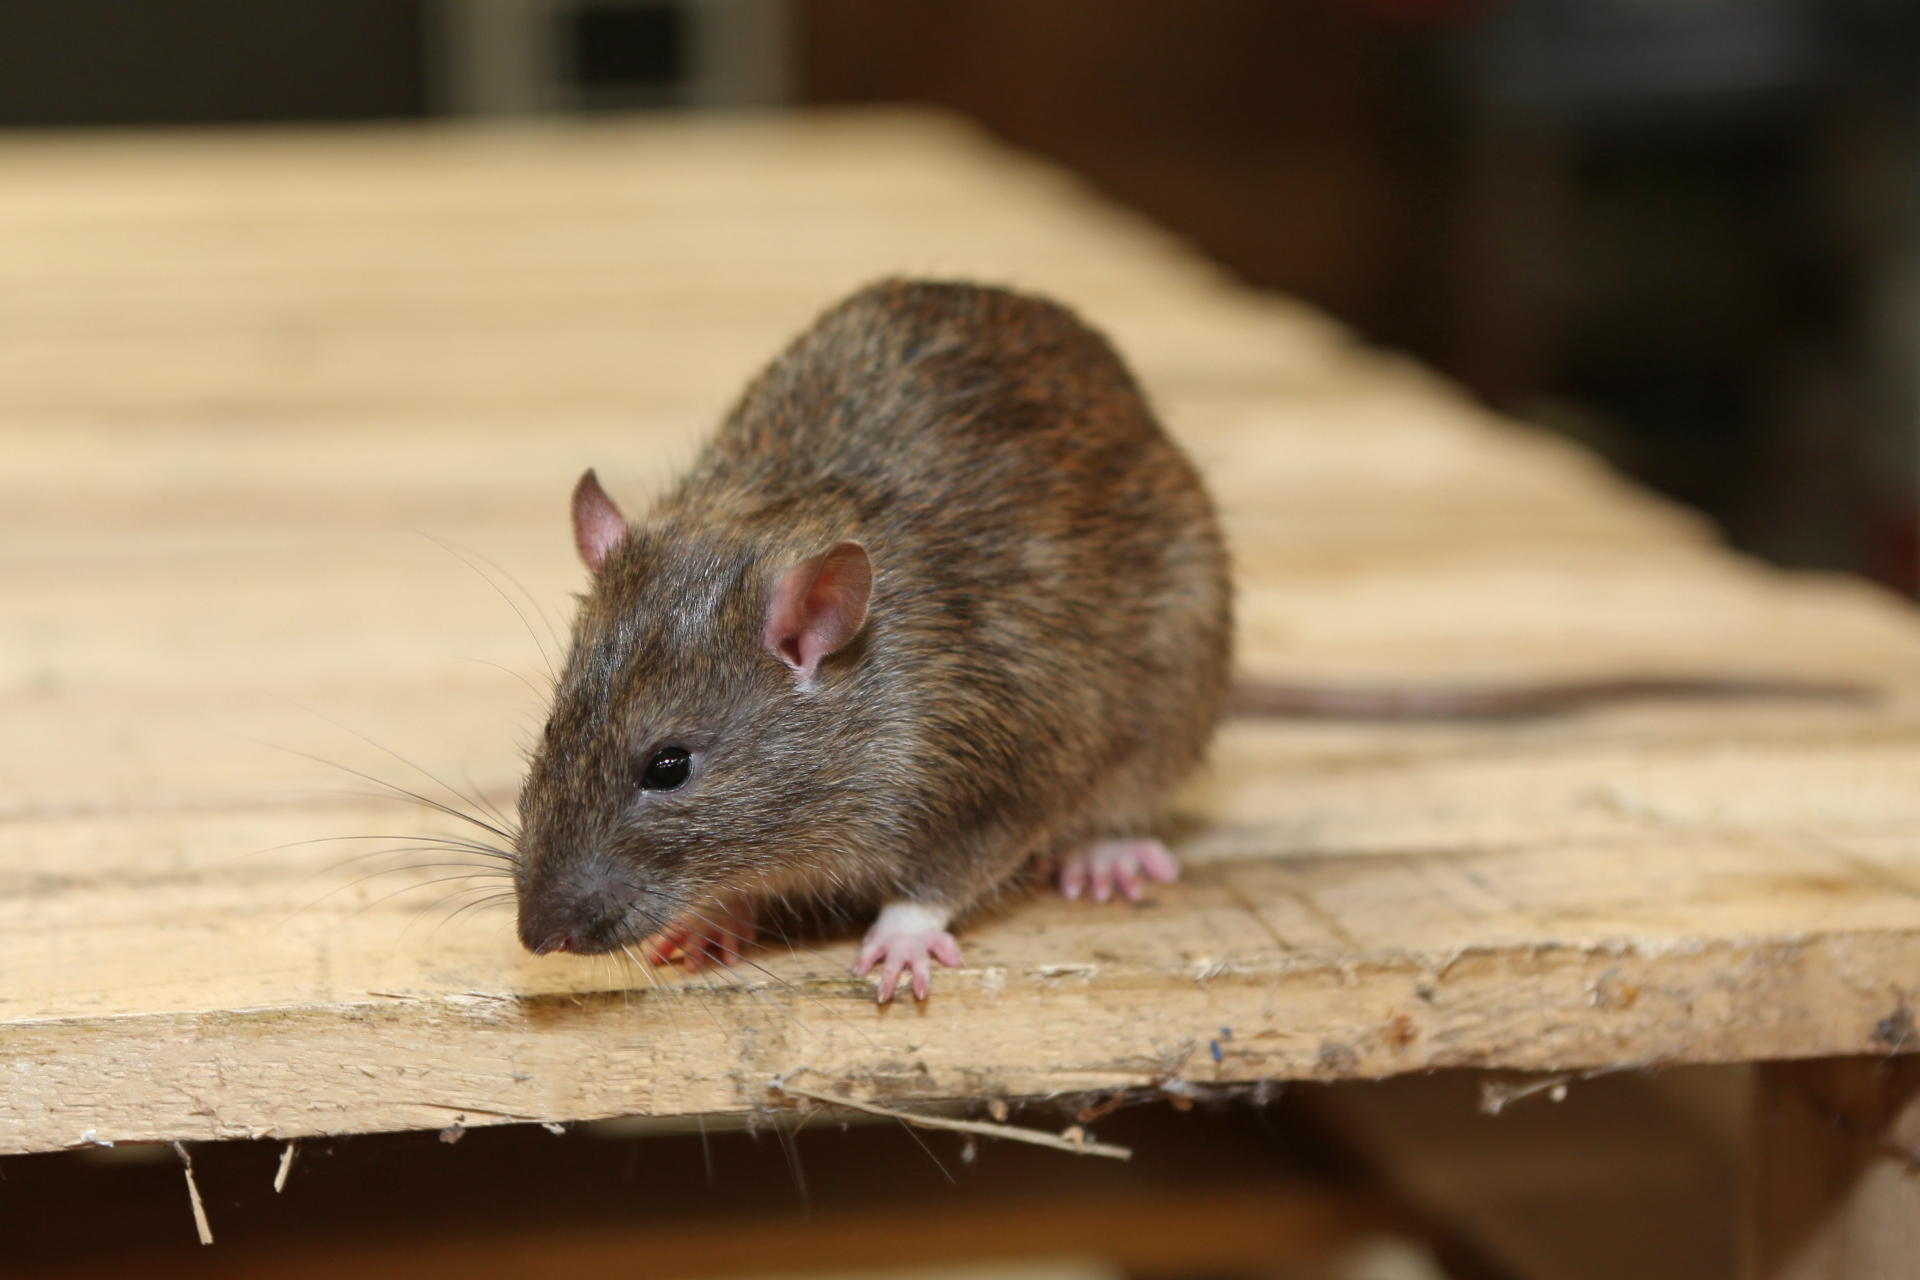 Rat Infestation, Pest Control in Catford, Hither Green, SE6. Call Now 020 8166 9746